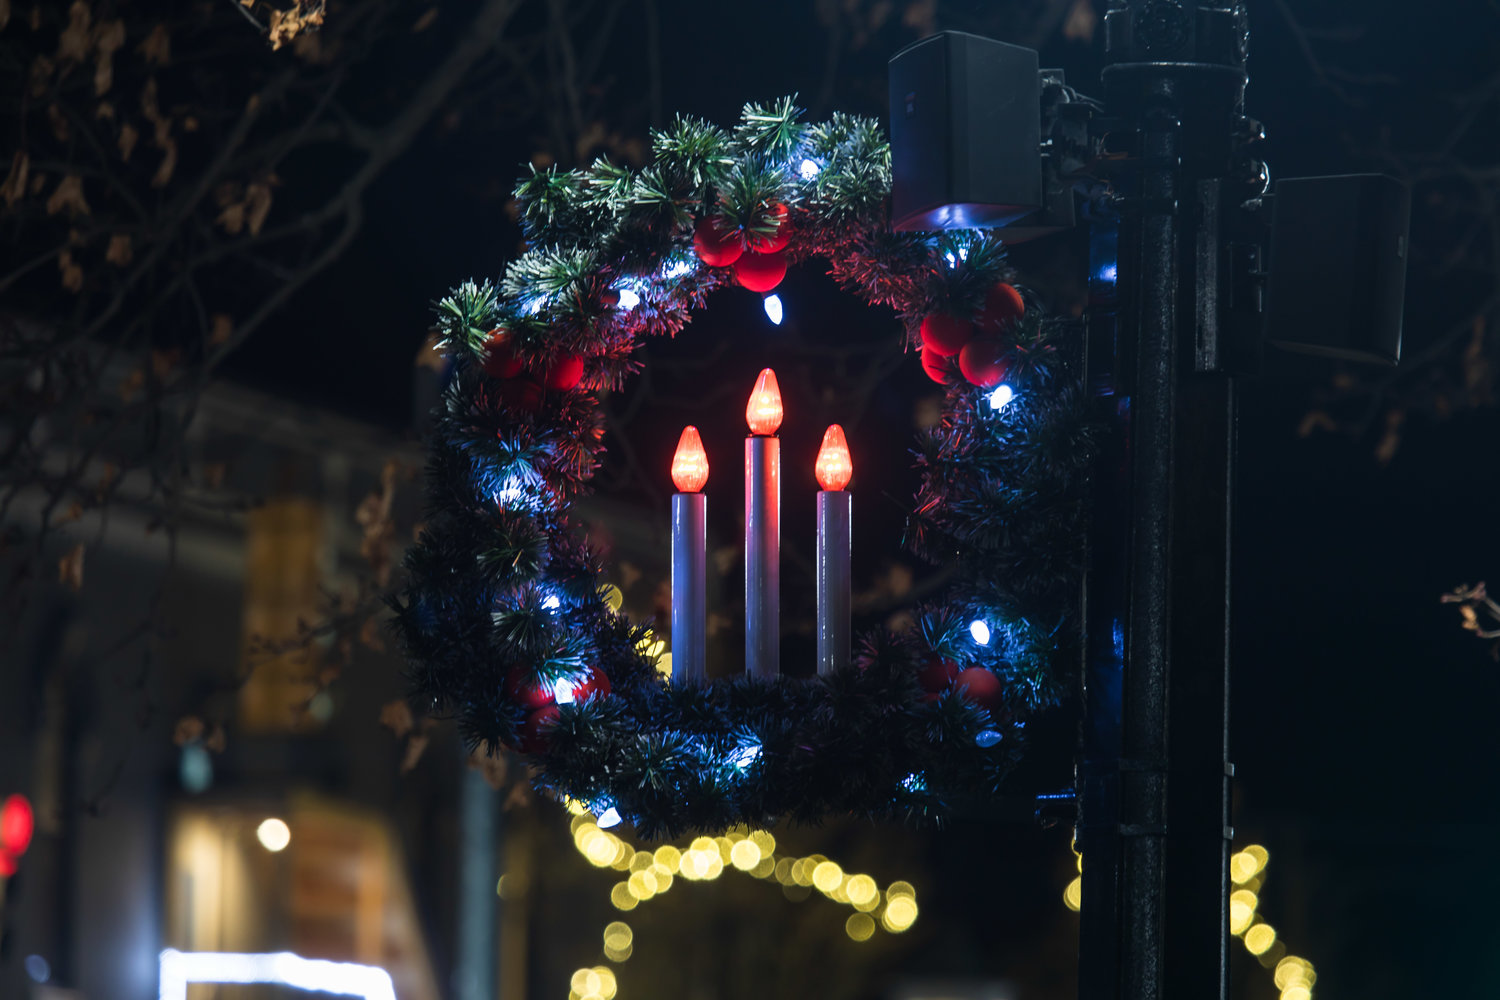 Christmas wreaths grace the lampposts in downtown Mason.